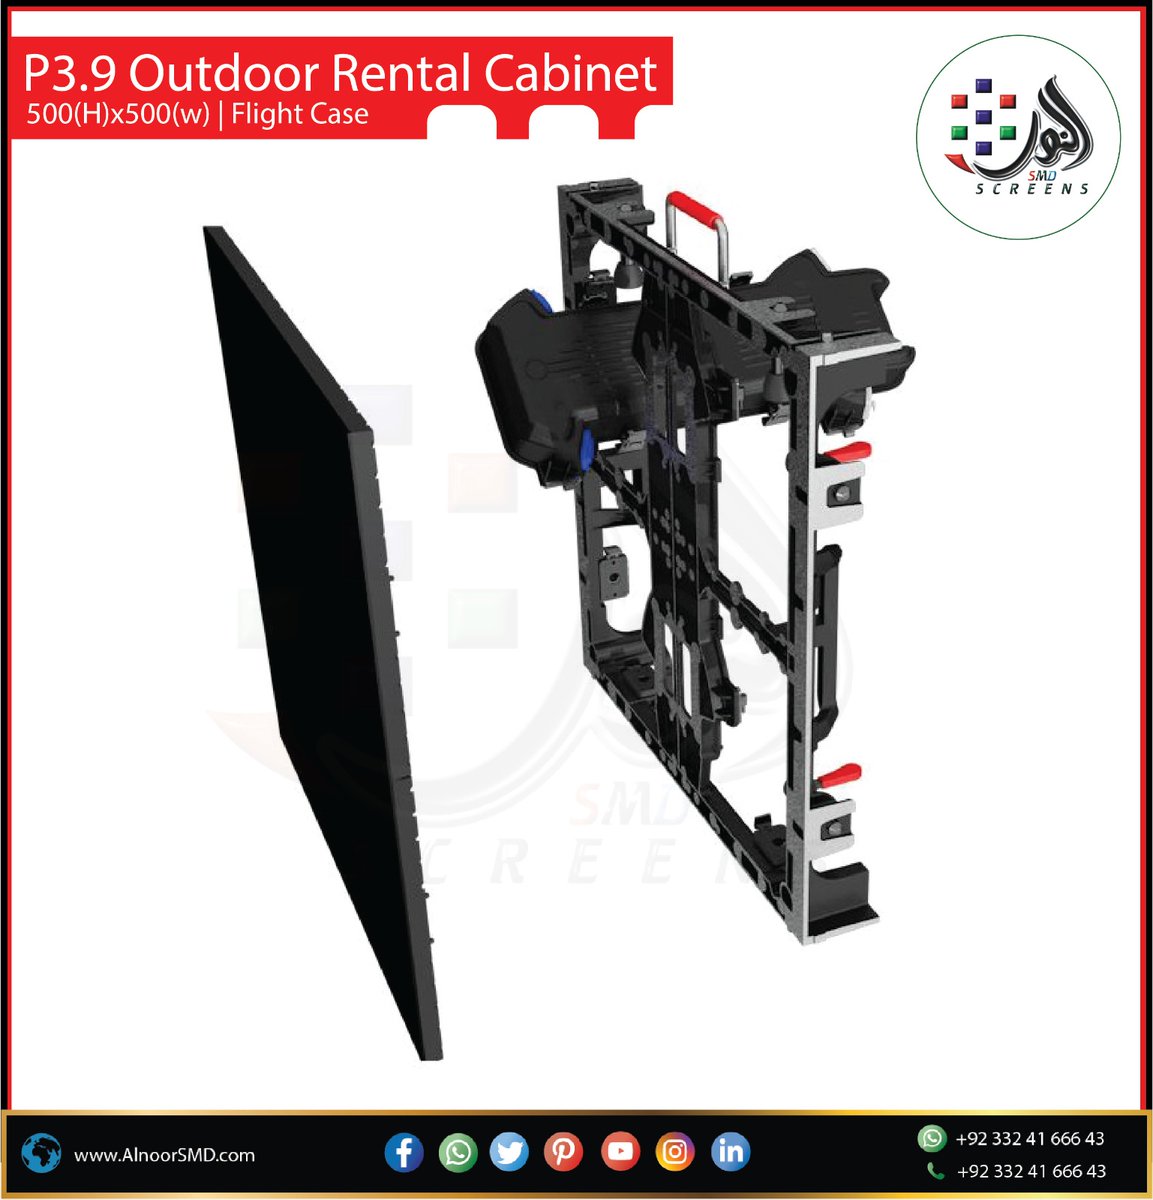 P3.9 Rental Outdoor Cabinet
Outdoor Rental Screen for Sale
Cabinet Dimension: 500x500mm
Module Dimension: 250x250mm
📞Call:
0332 4166643
0311 5878074
🌐Visit website:
alnoorsmd.com
#alnoorsmd #SMD #smdscreen #p4outdoor #rentalsmd #rentalforsale #aluminiumcabinet